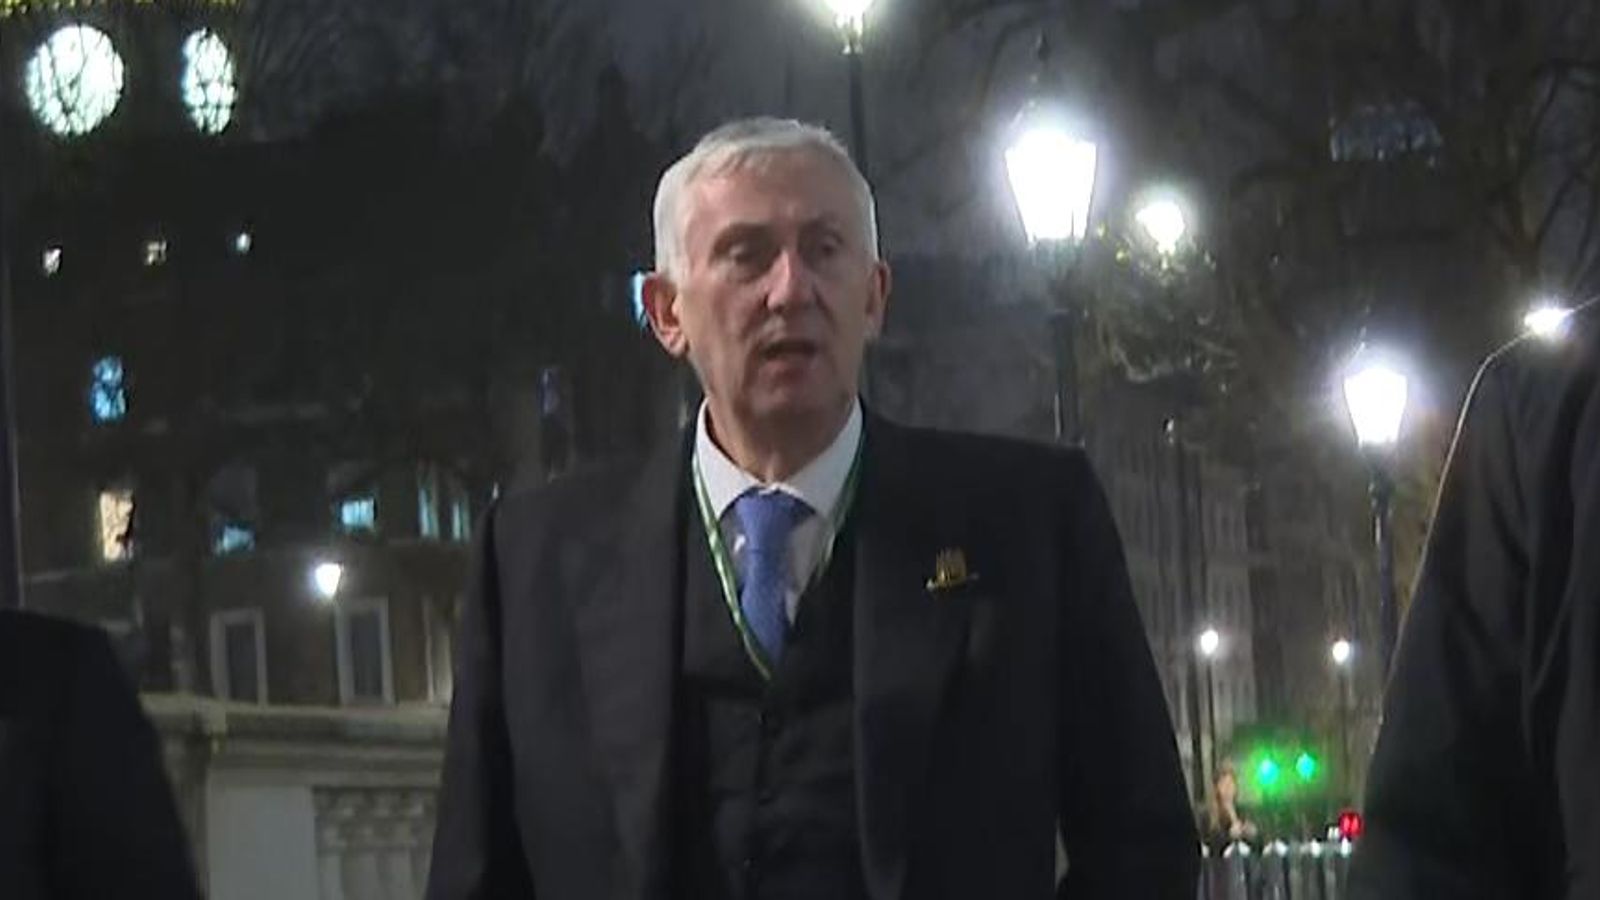 Sir Lindsay Hoyle urged to 'come clean' as dozens of MPs call for him to go